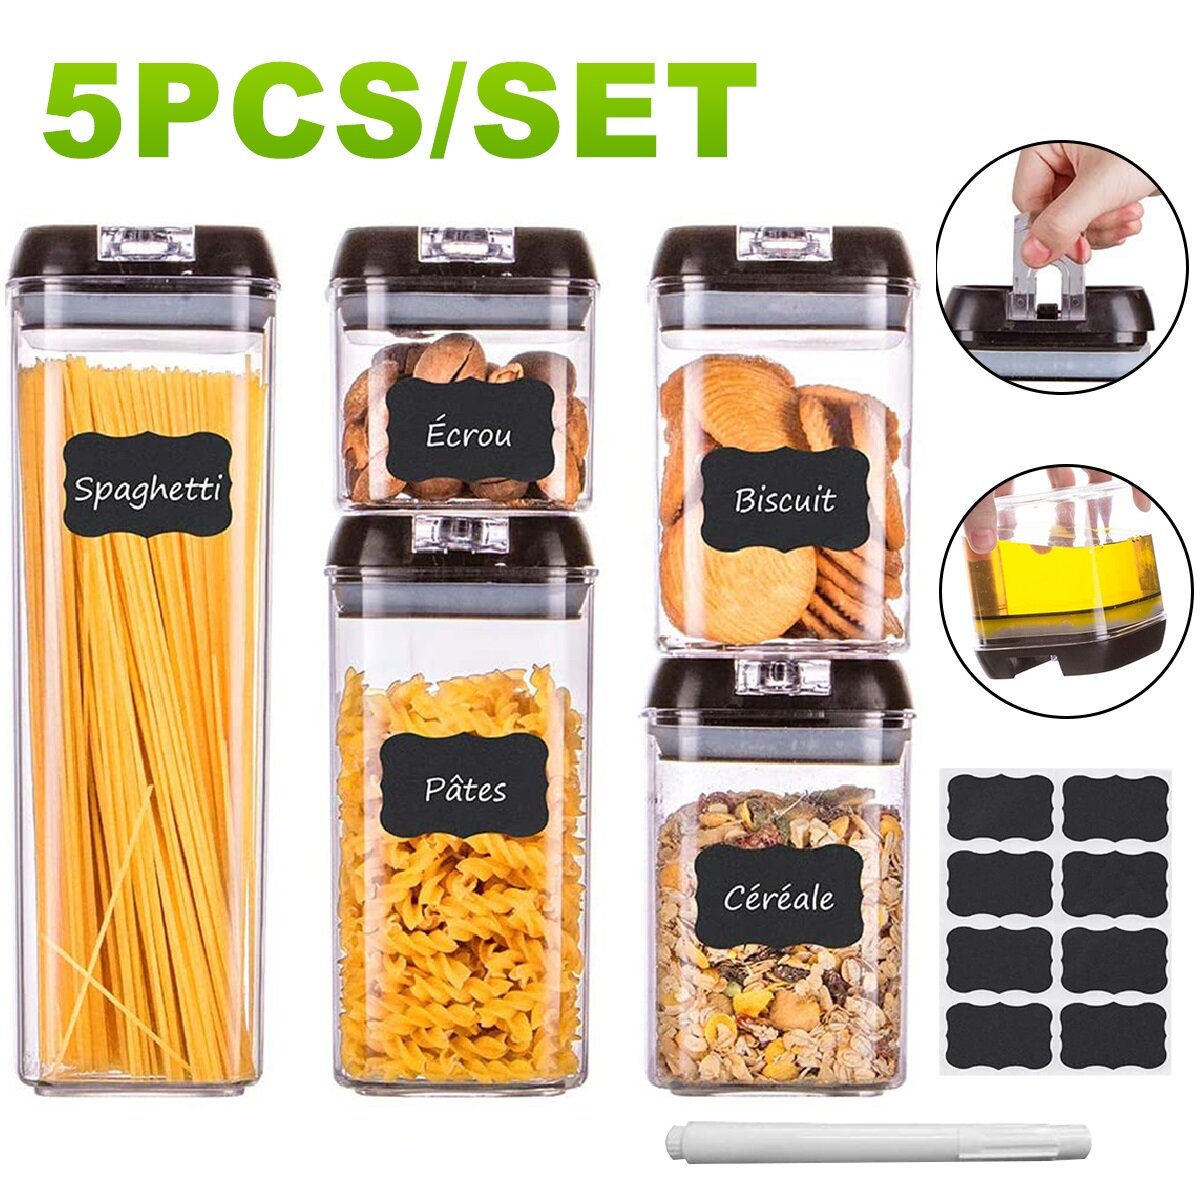 Image of 5PCS Air-Tight Food Storage Container Easy Lock Sealed Jar Plastic Transparent Milk Powder Grains Candy Kitchen Organize